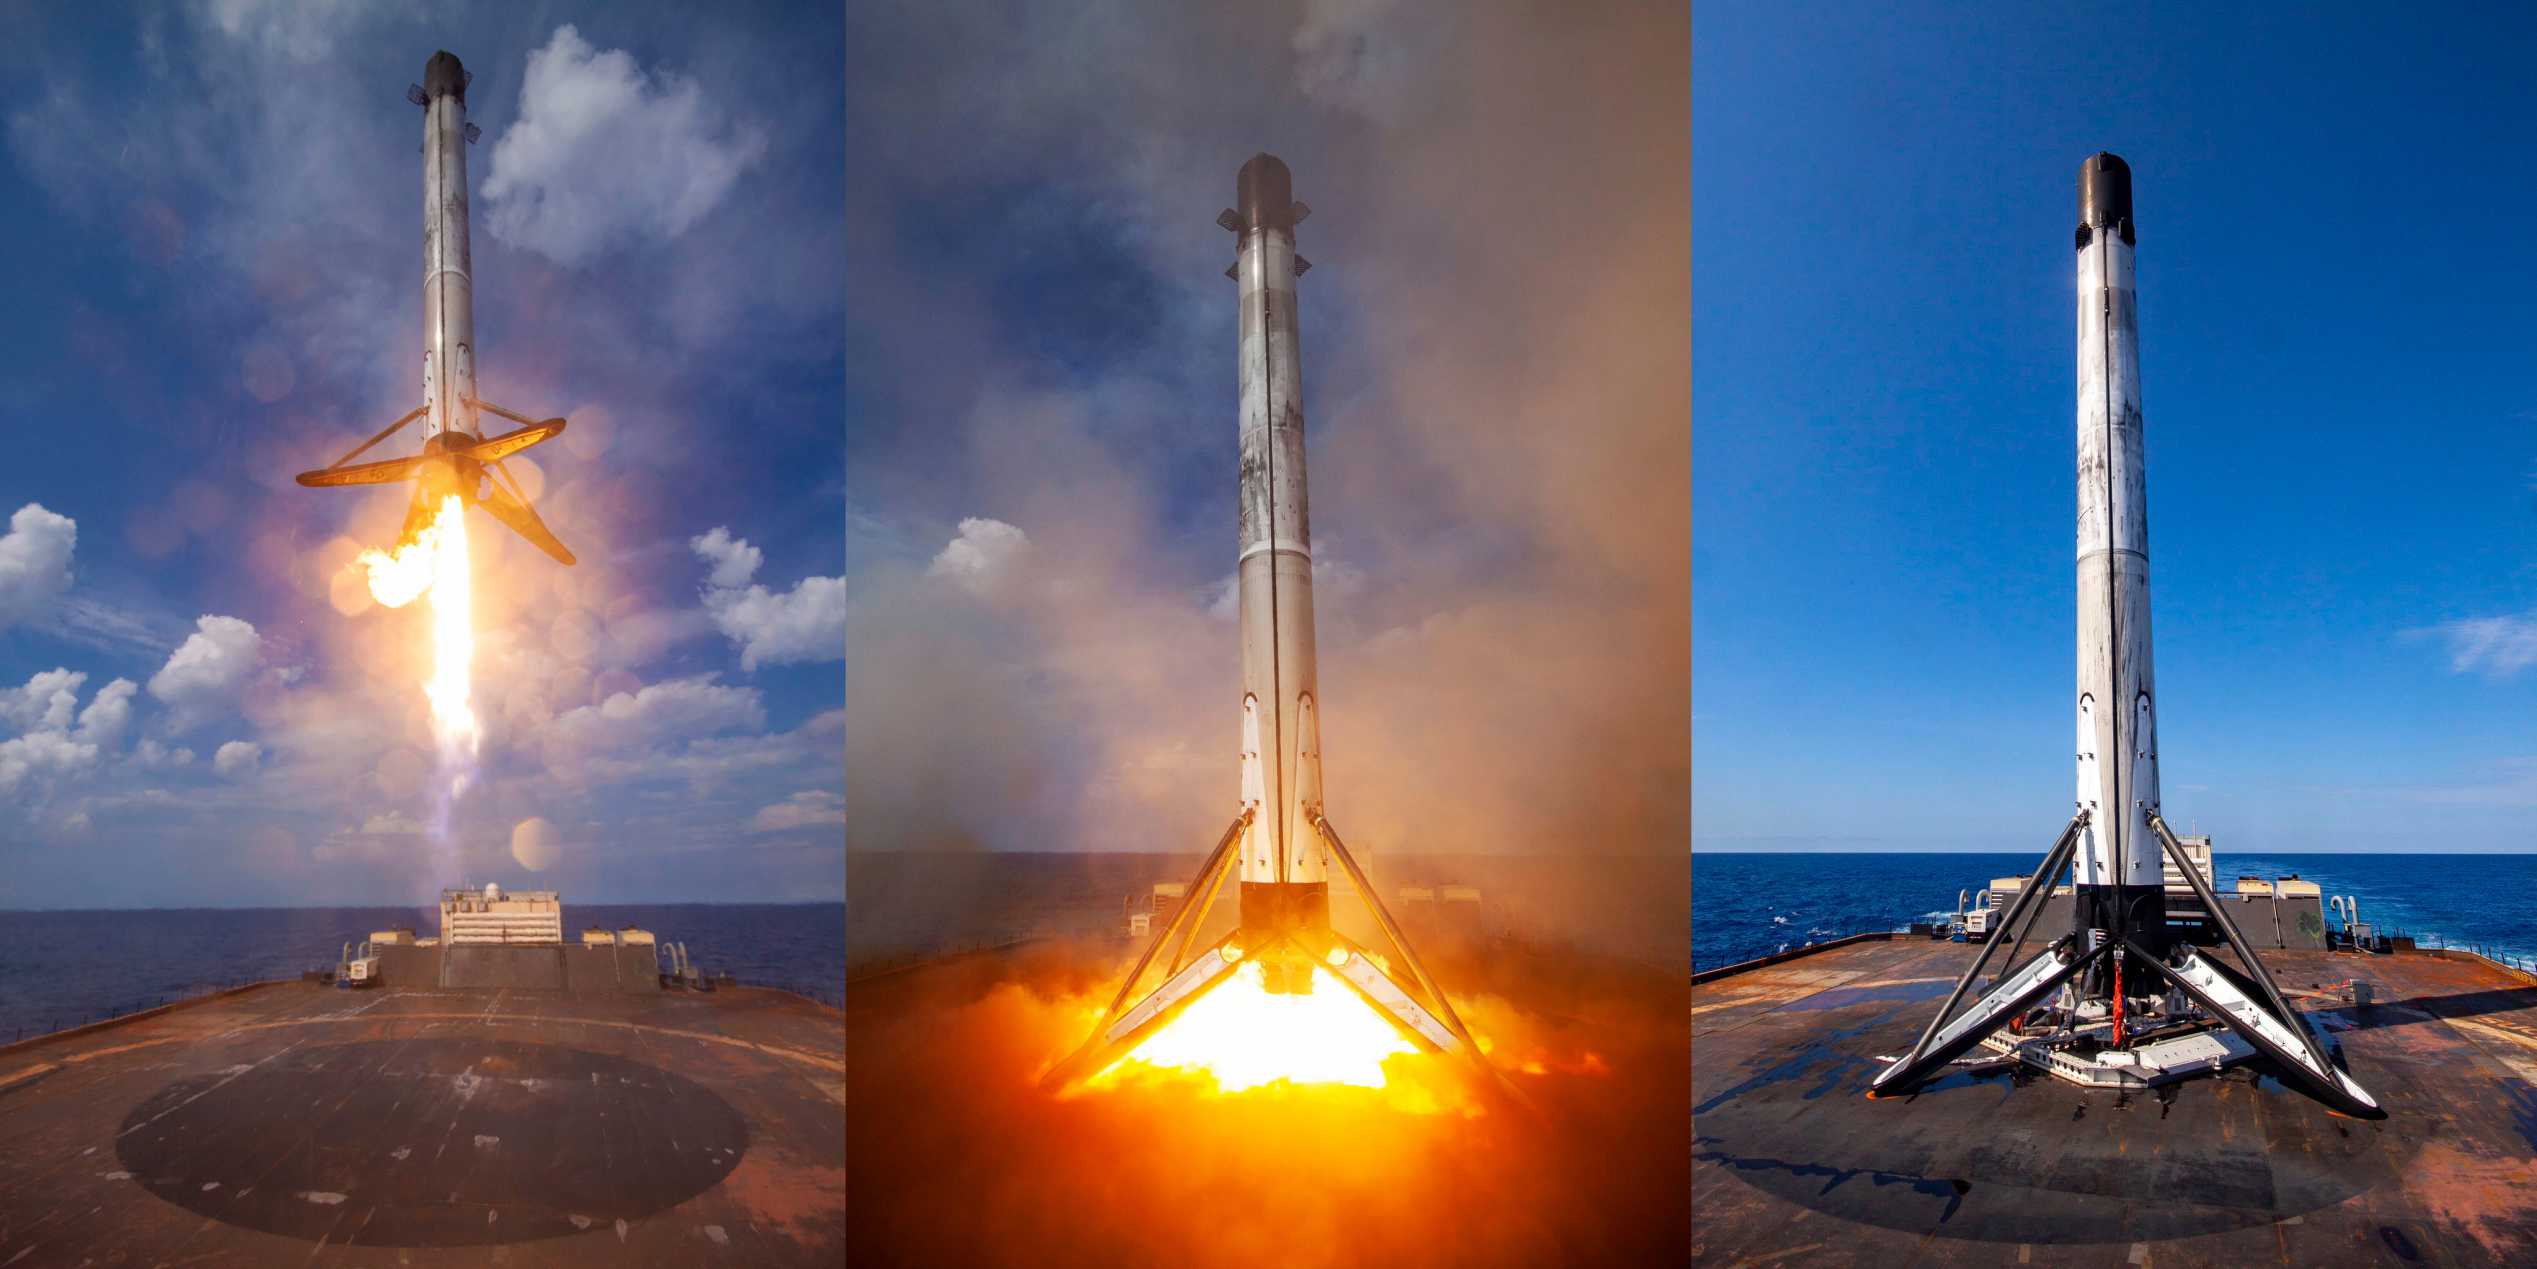 SpaceX celebrates five years record streak of successful rocket